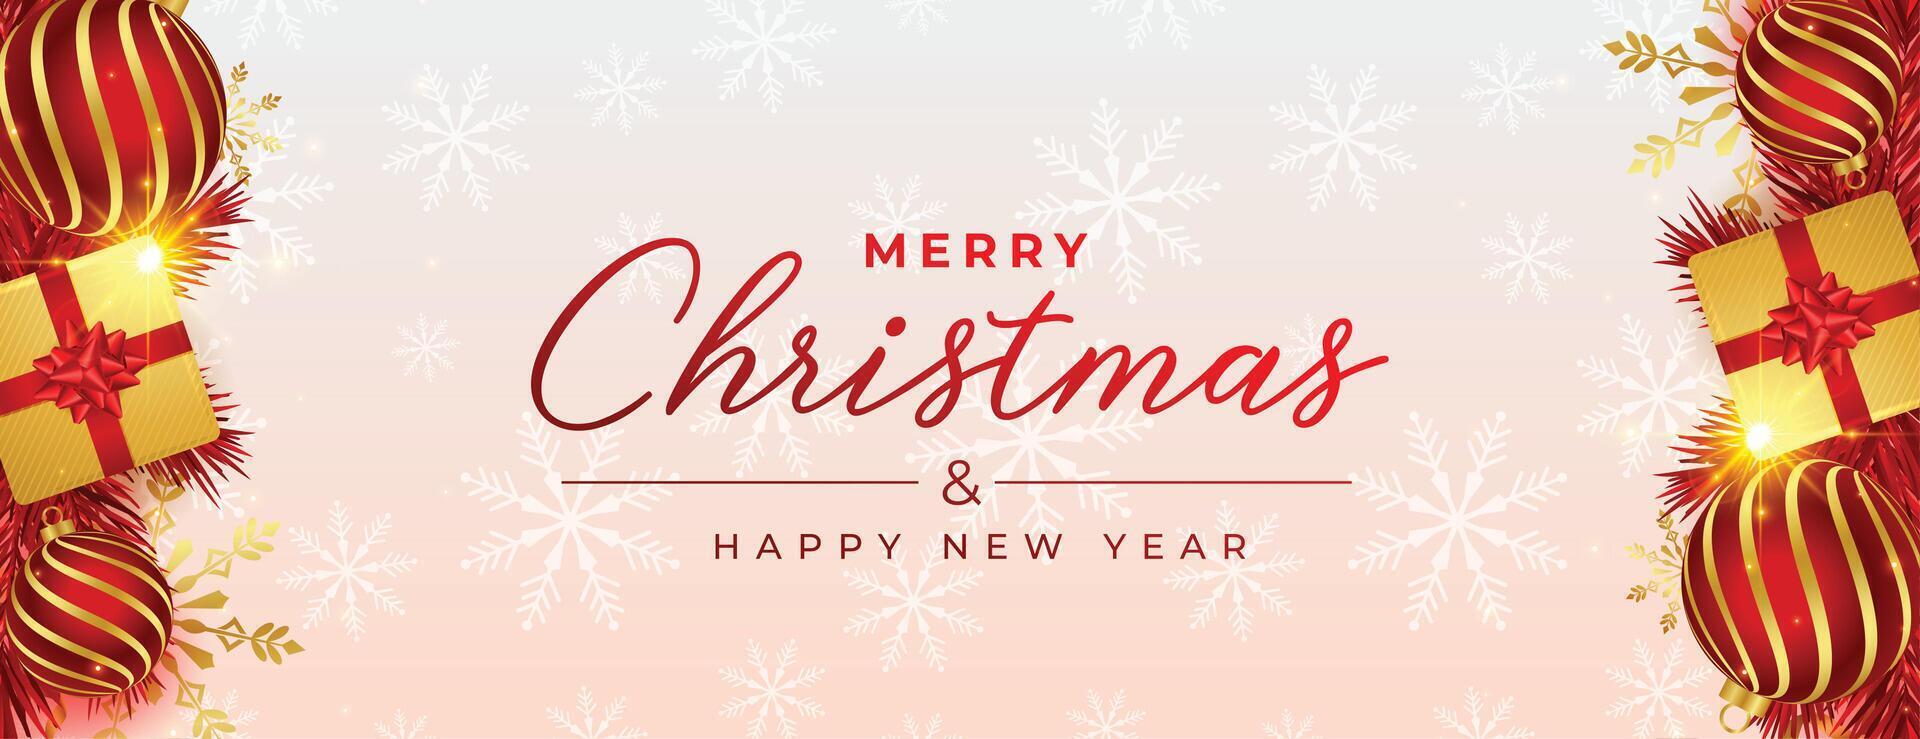 merry christmas and new year seasonal realistic banner design vector